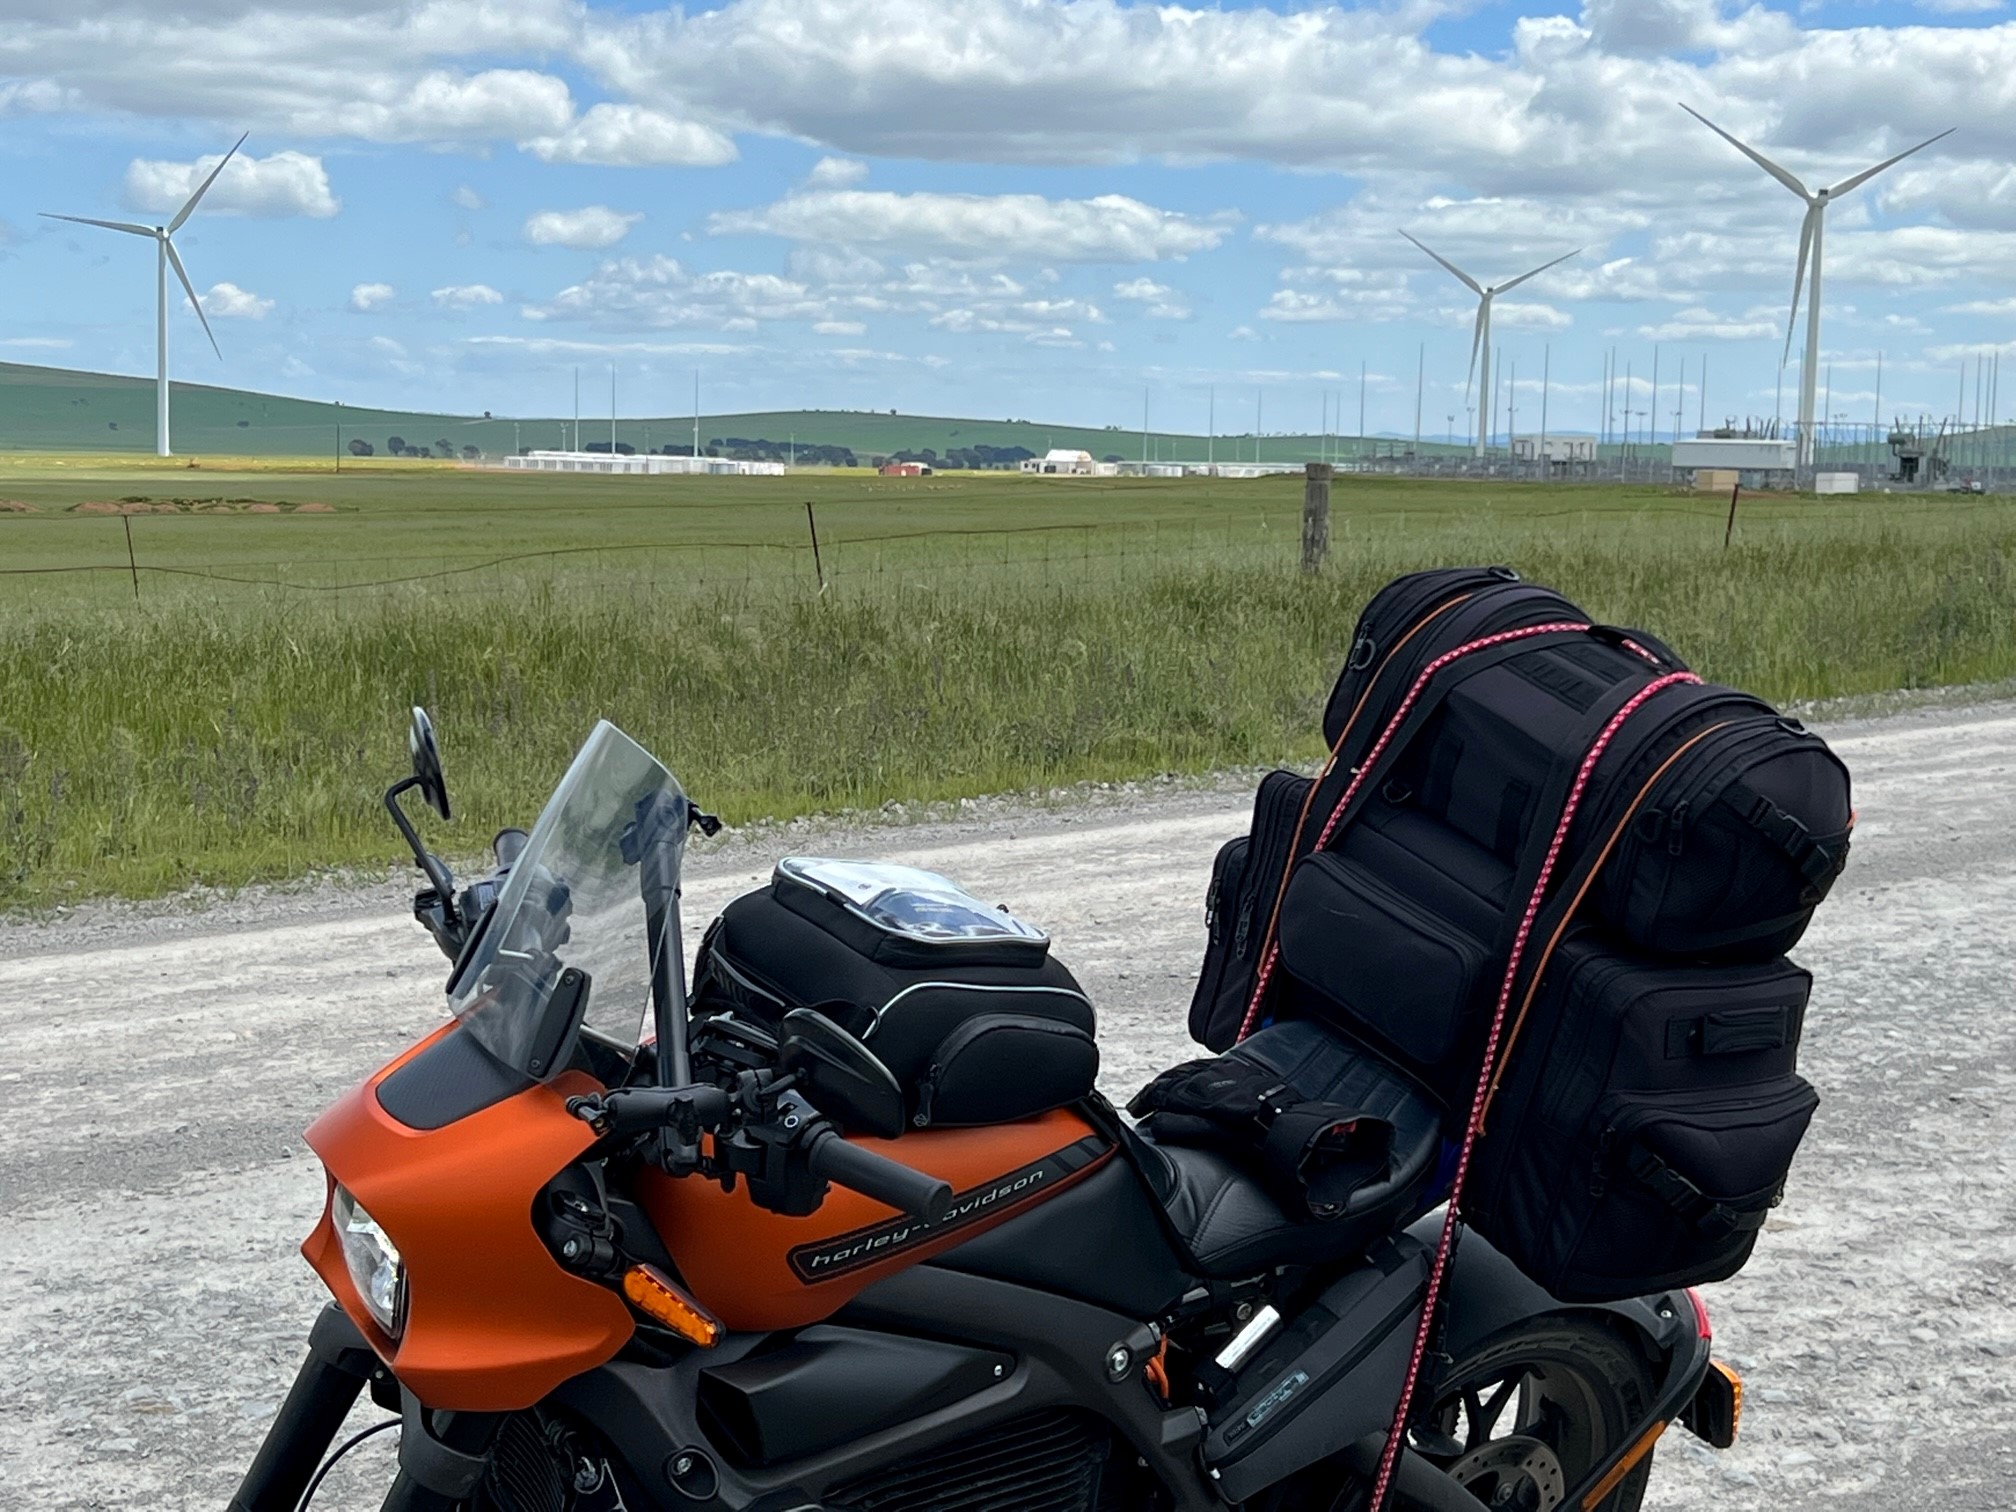 Ed's orange and black Harley parked near a wind farm in rural South Australia 